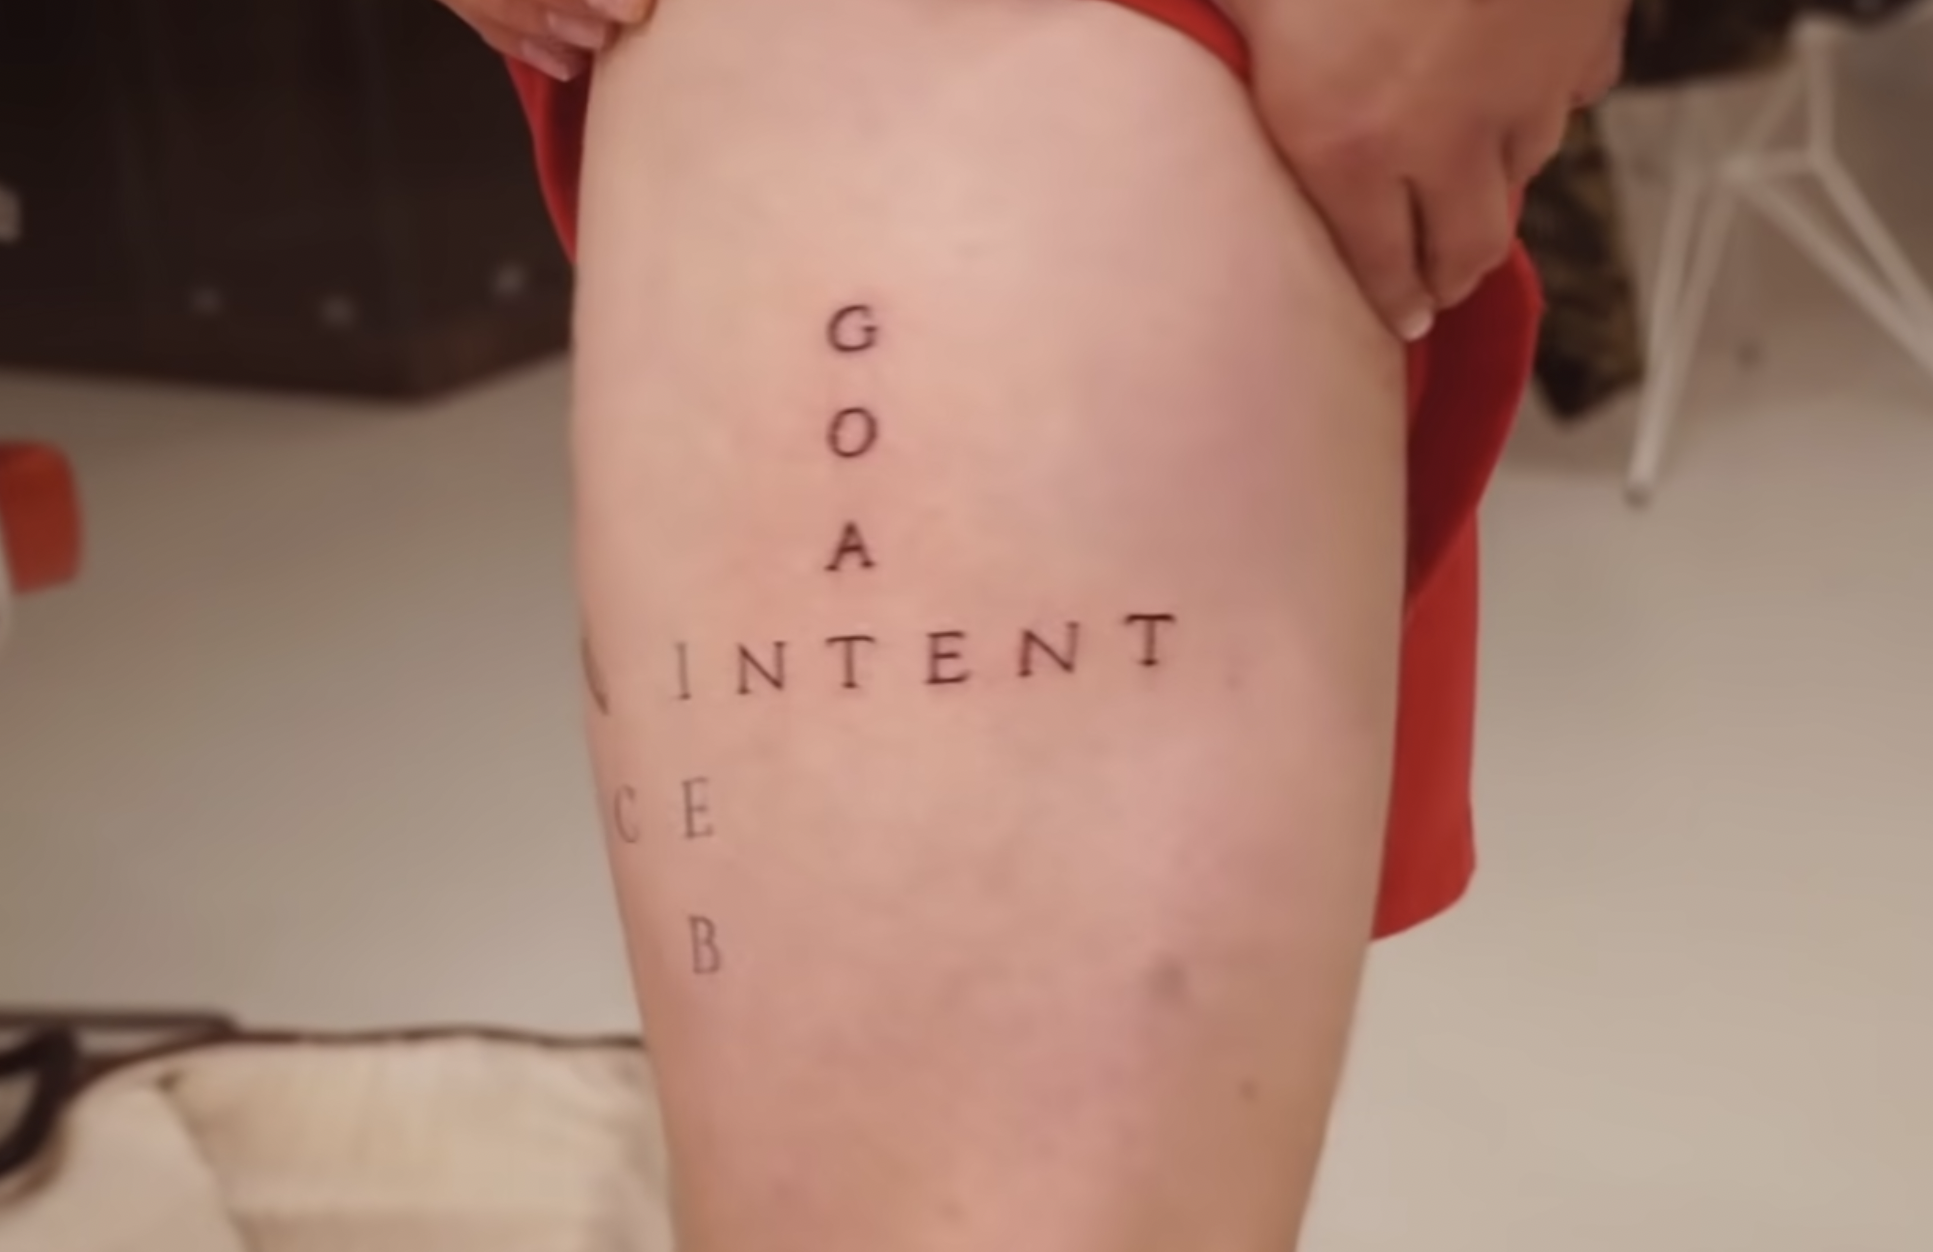 Every Tattoo on Jake Paul and The Stories Behind Them  Sportsmanor